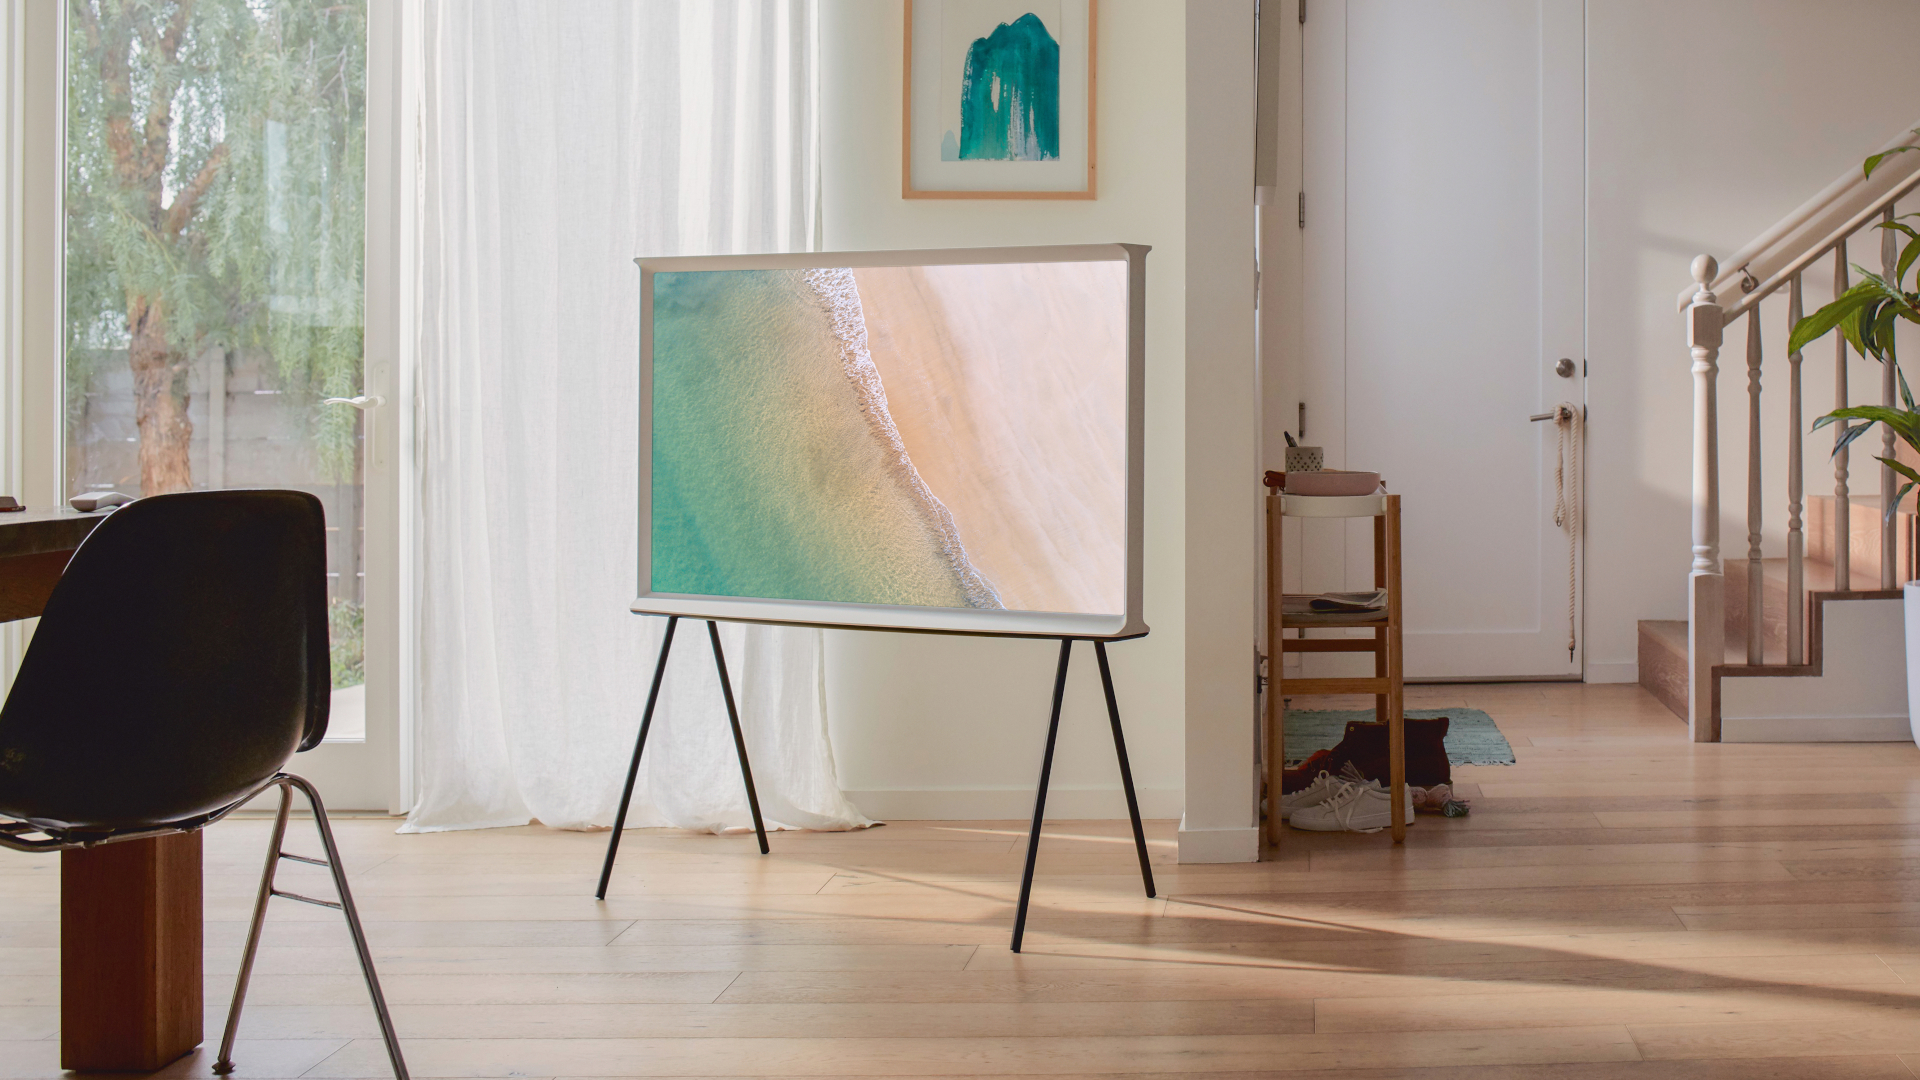 Samsung TV Catalog 2019: Every new Samsung TV coming in 2019 2